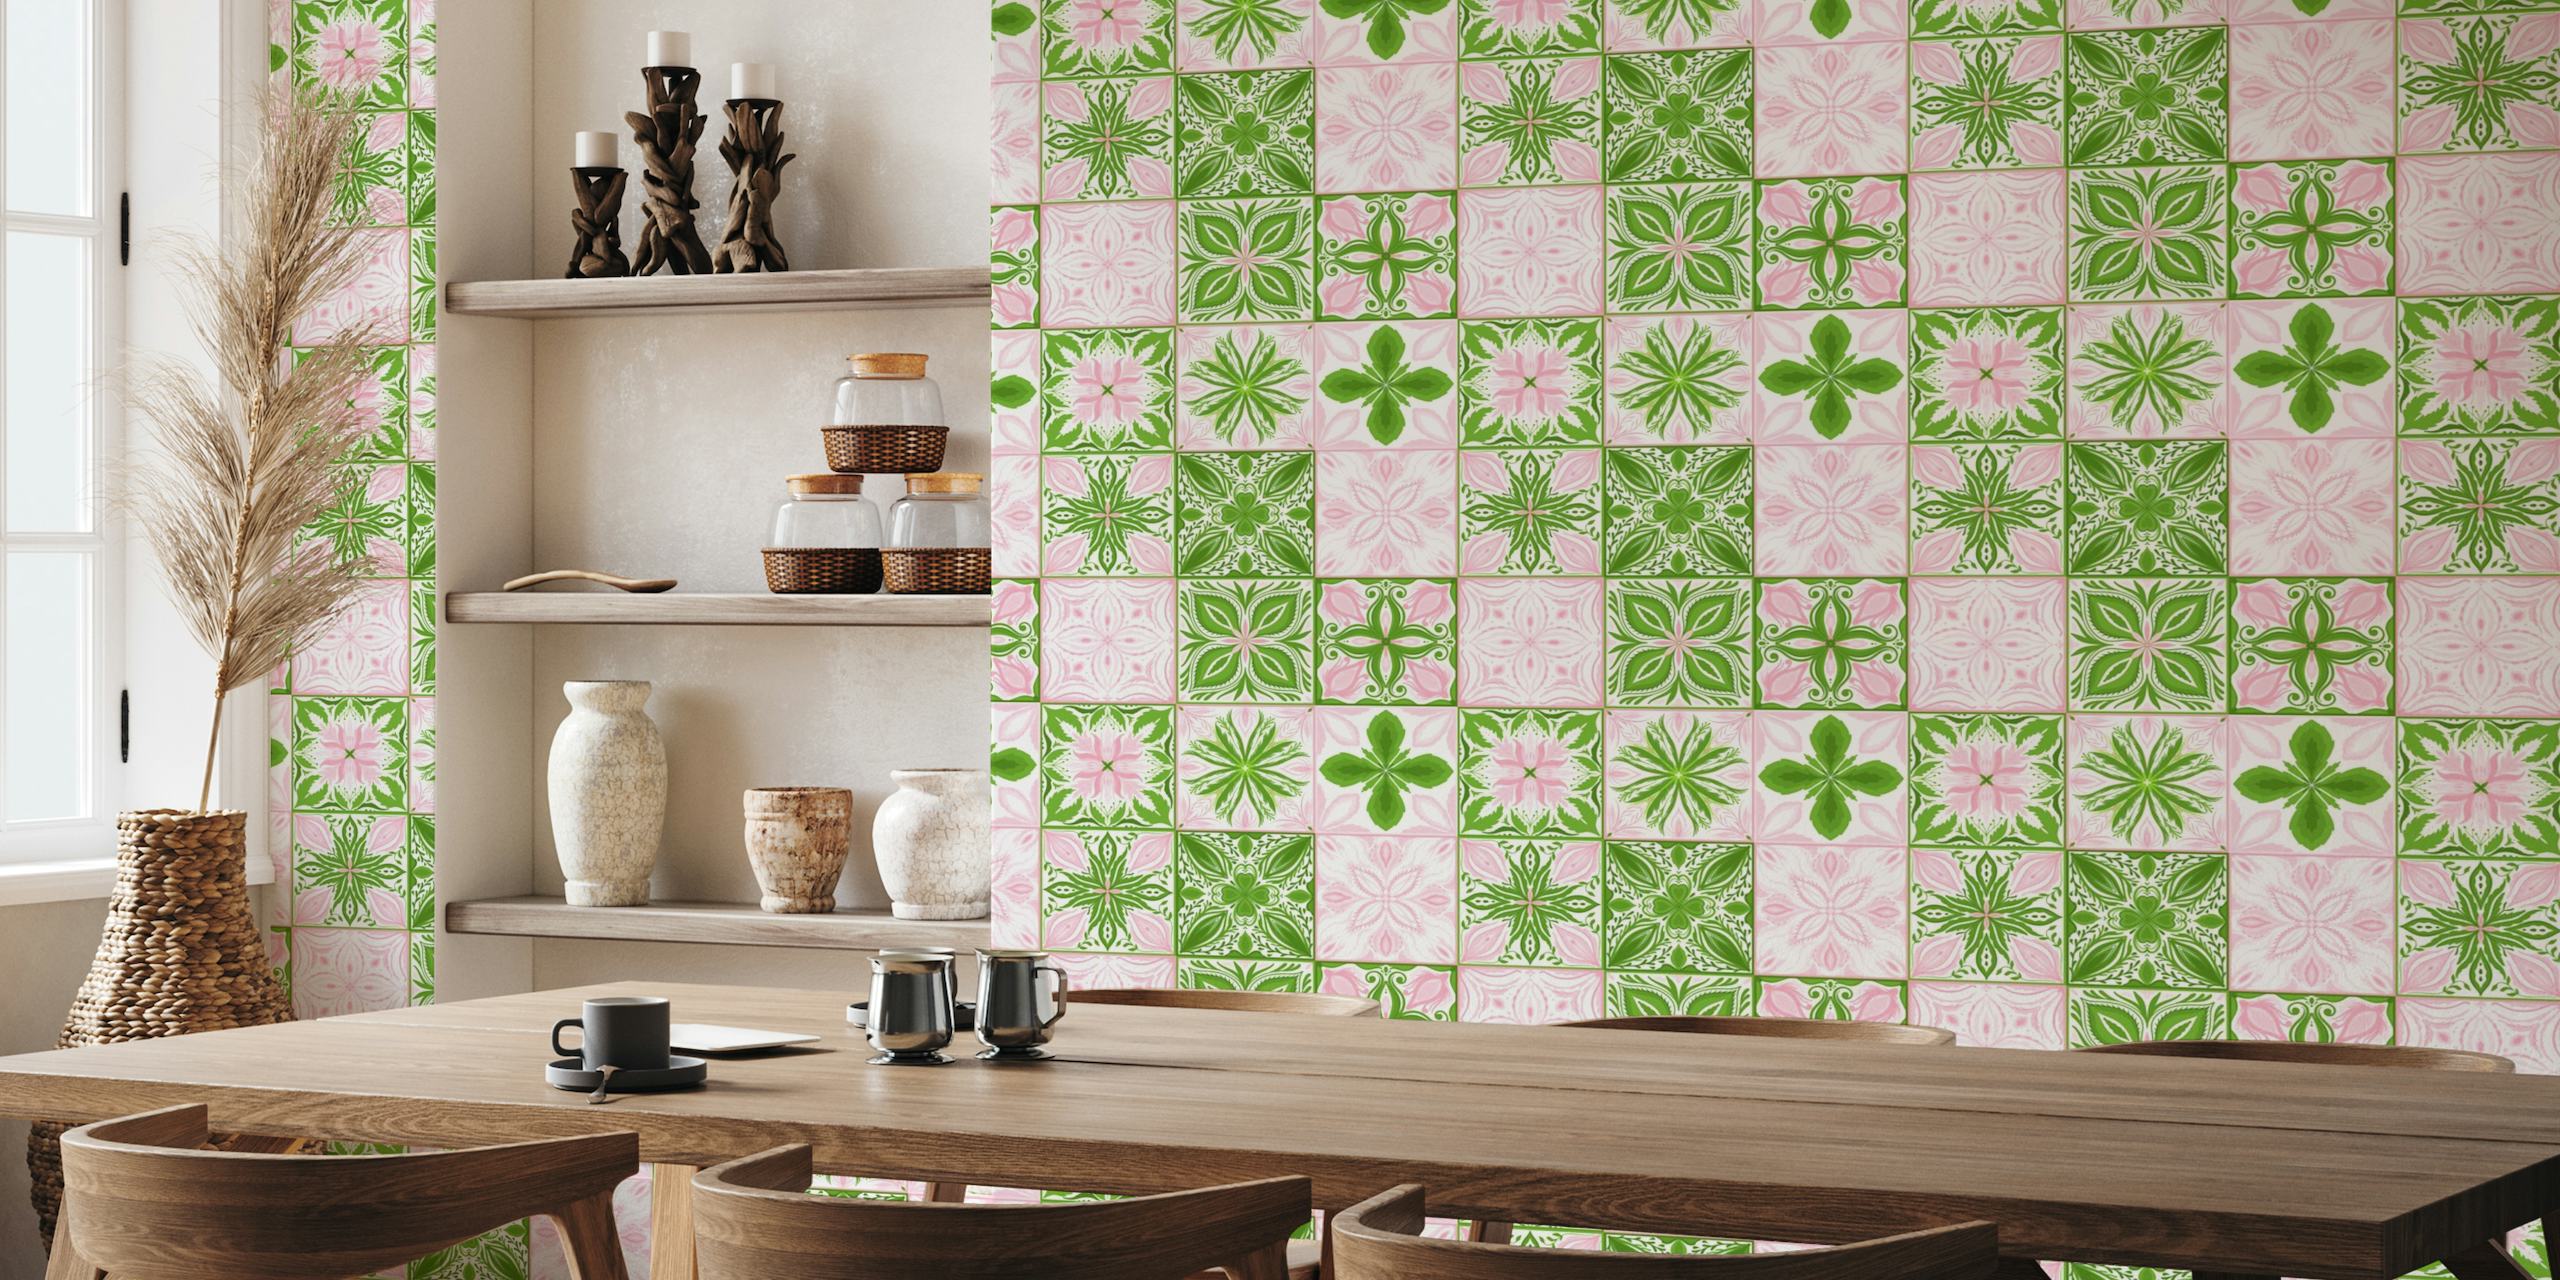 Ornate tiles in pink and green tapetit